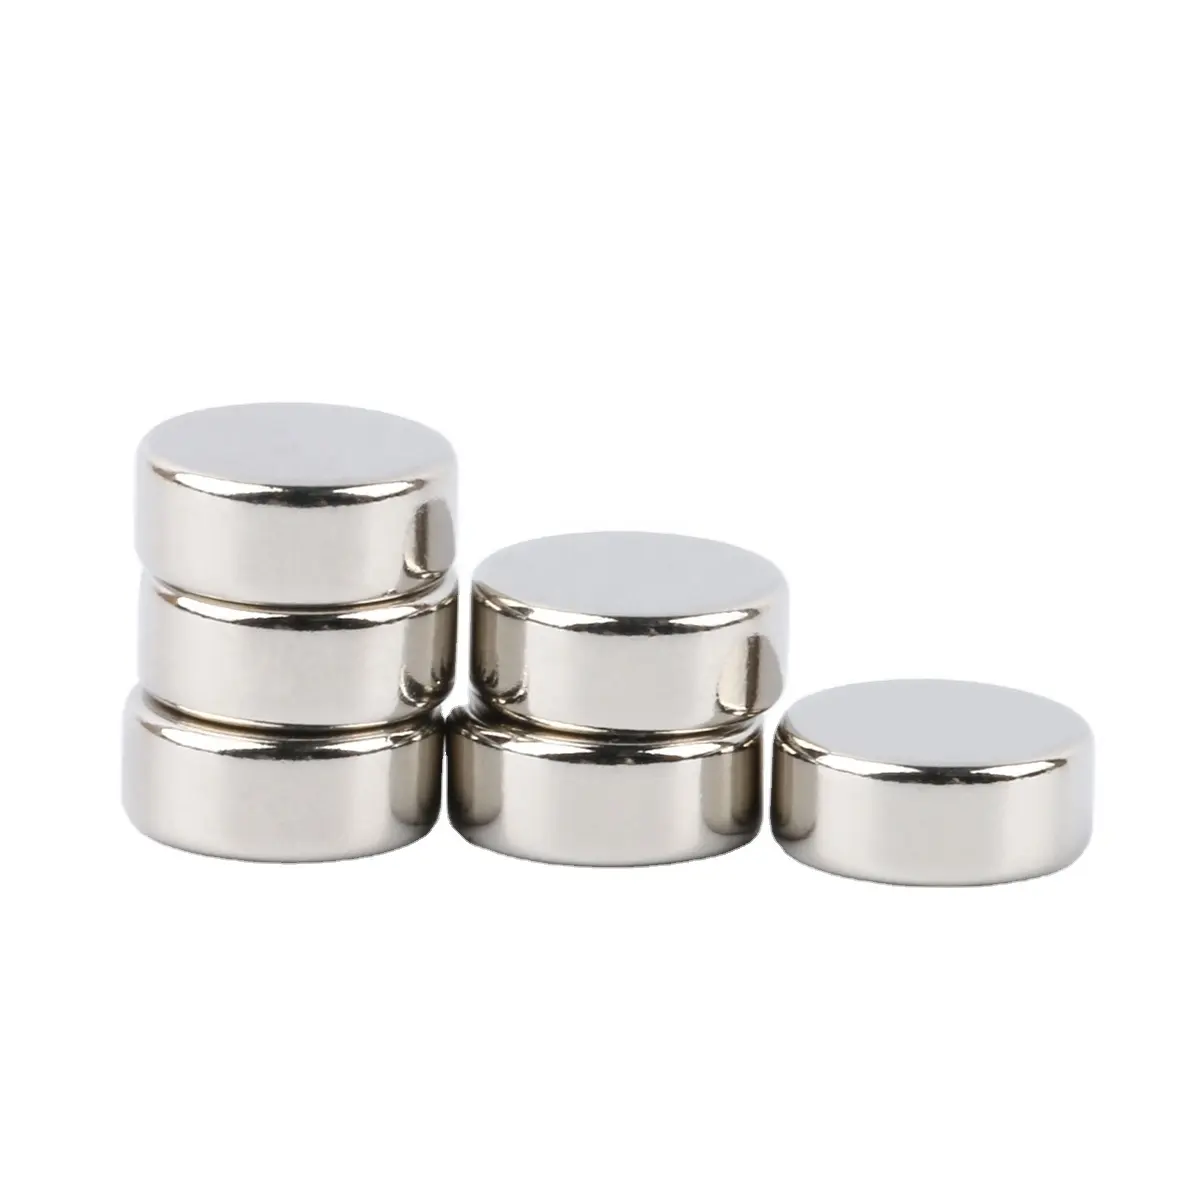 N52 Powerful Round Button Magnet Rare Earth Neodymium Magnet Disc Custom Magnetic Material